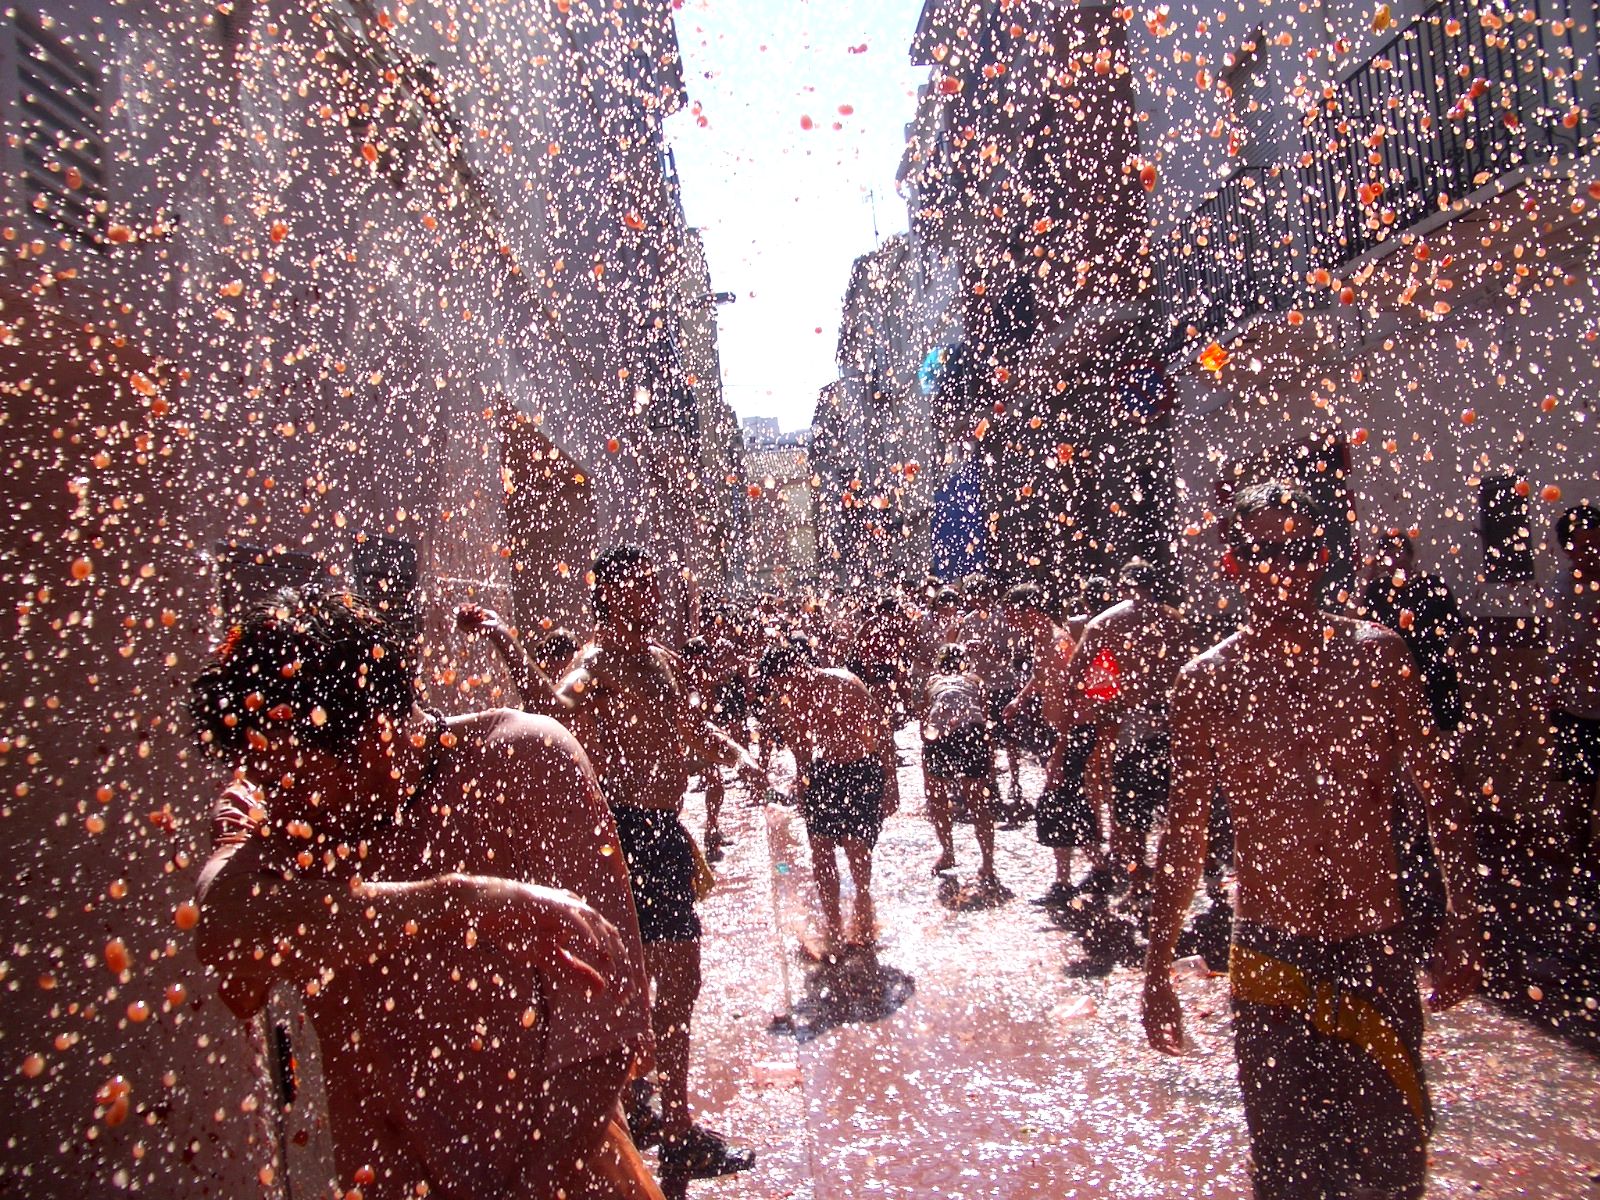 The “La Tomatina” Festival – Tomatoes, tomatoes and more tomatoes